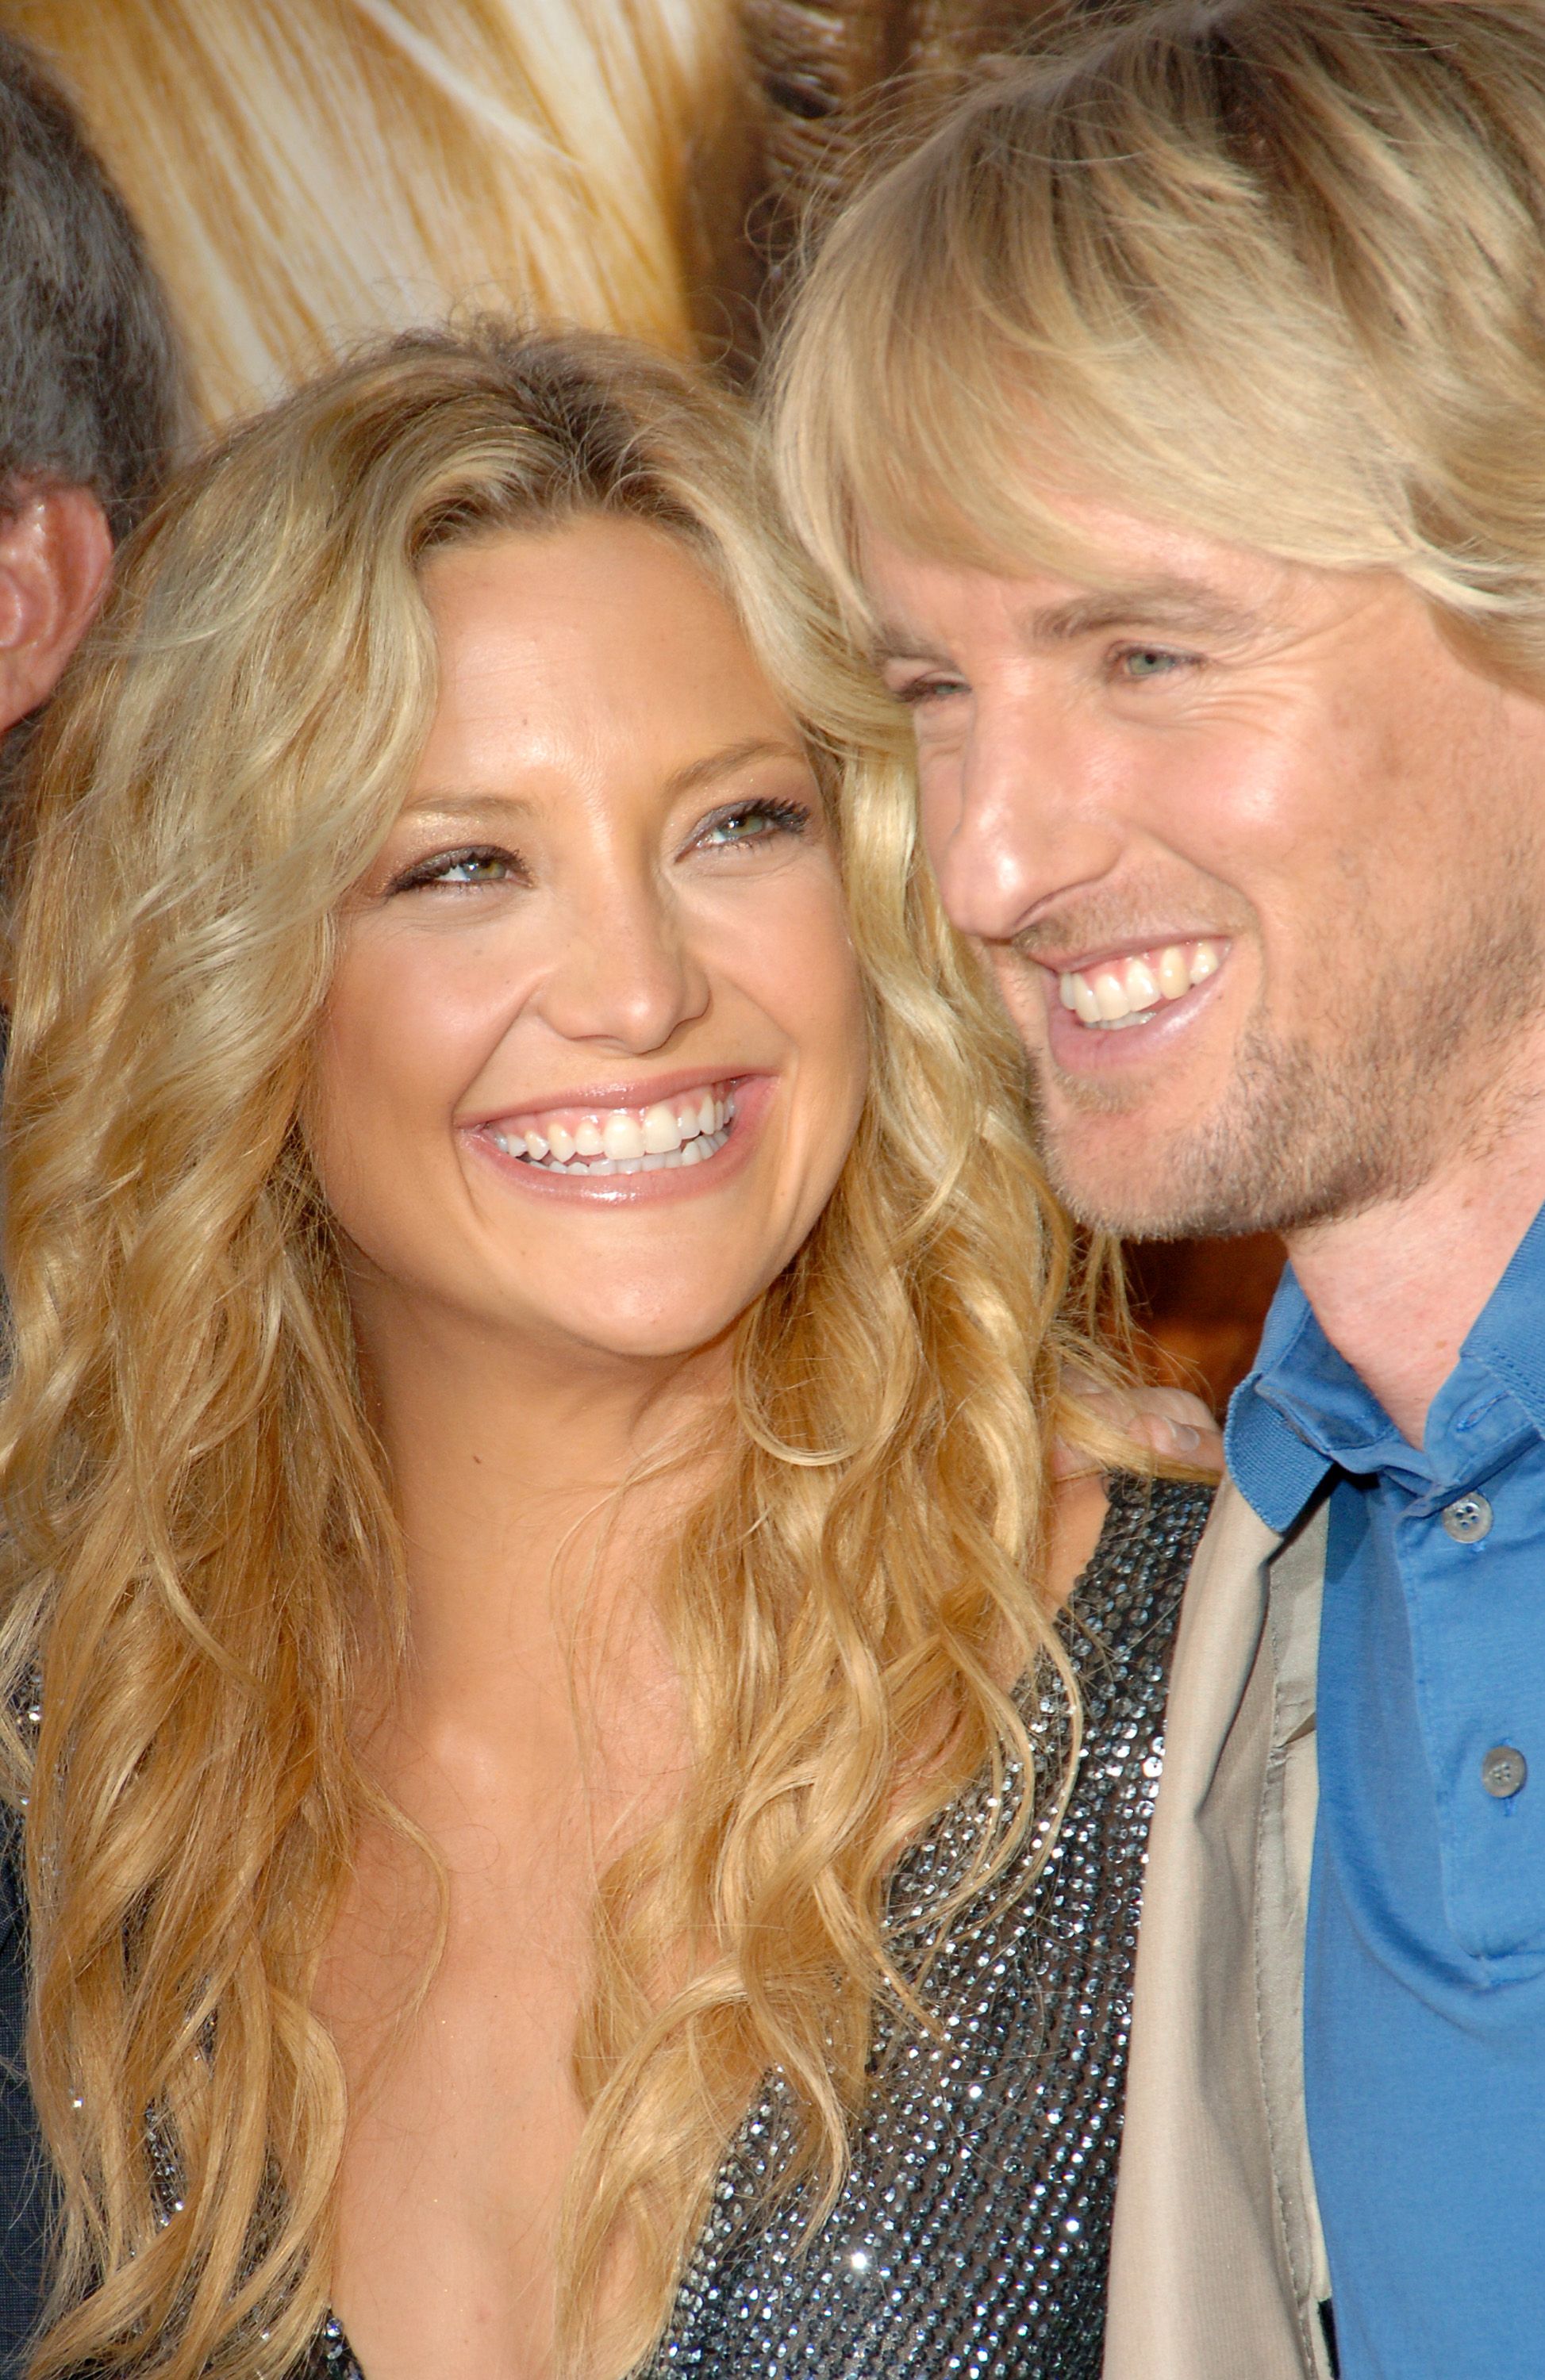 Kate Hudson and Owen Wilson at the "You, Me and Dupree" world premiere in Hollywood, California, on  July 10, 2006. | Source: Jon Kopaloff/FilmMagic/Getty Images